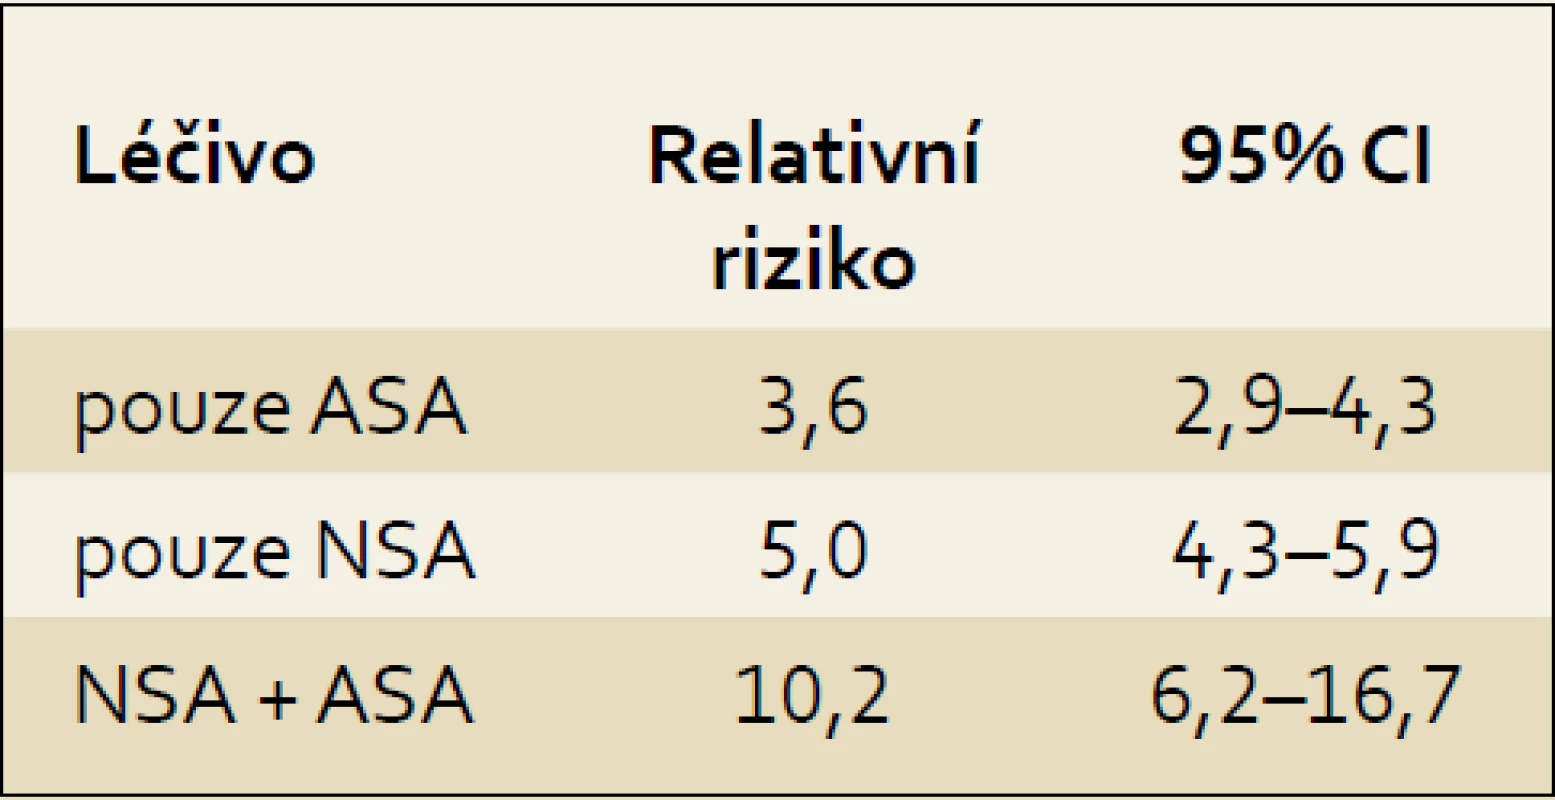 Riziko vzniku NSA gastropatie při monoterapii ASA a při kombinované léčbě s NSA. 
Tab. 1. The risk for NSAID-gastropathy development due to ASA therapy itself and on combination therapy by NSAIDs.